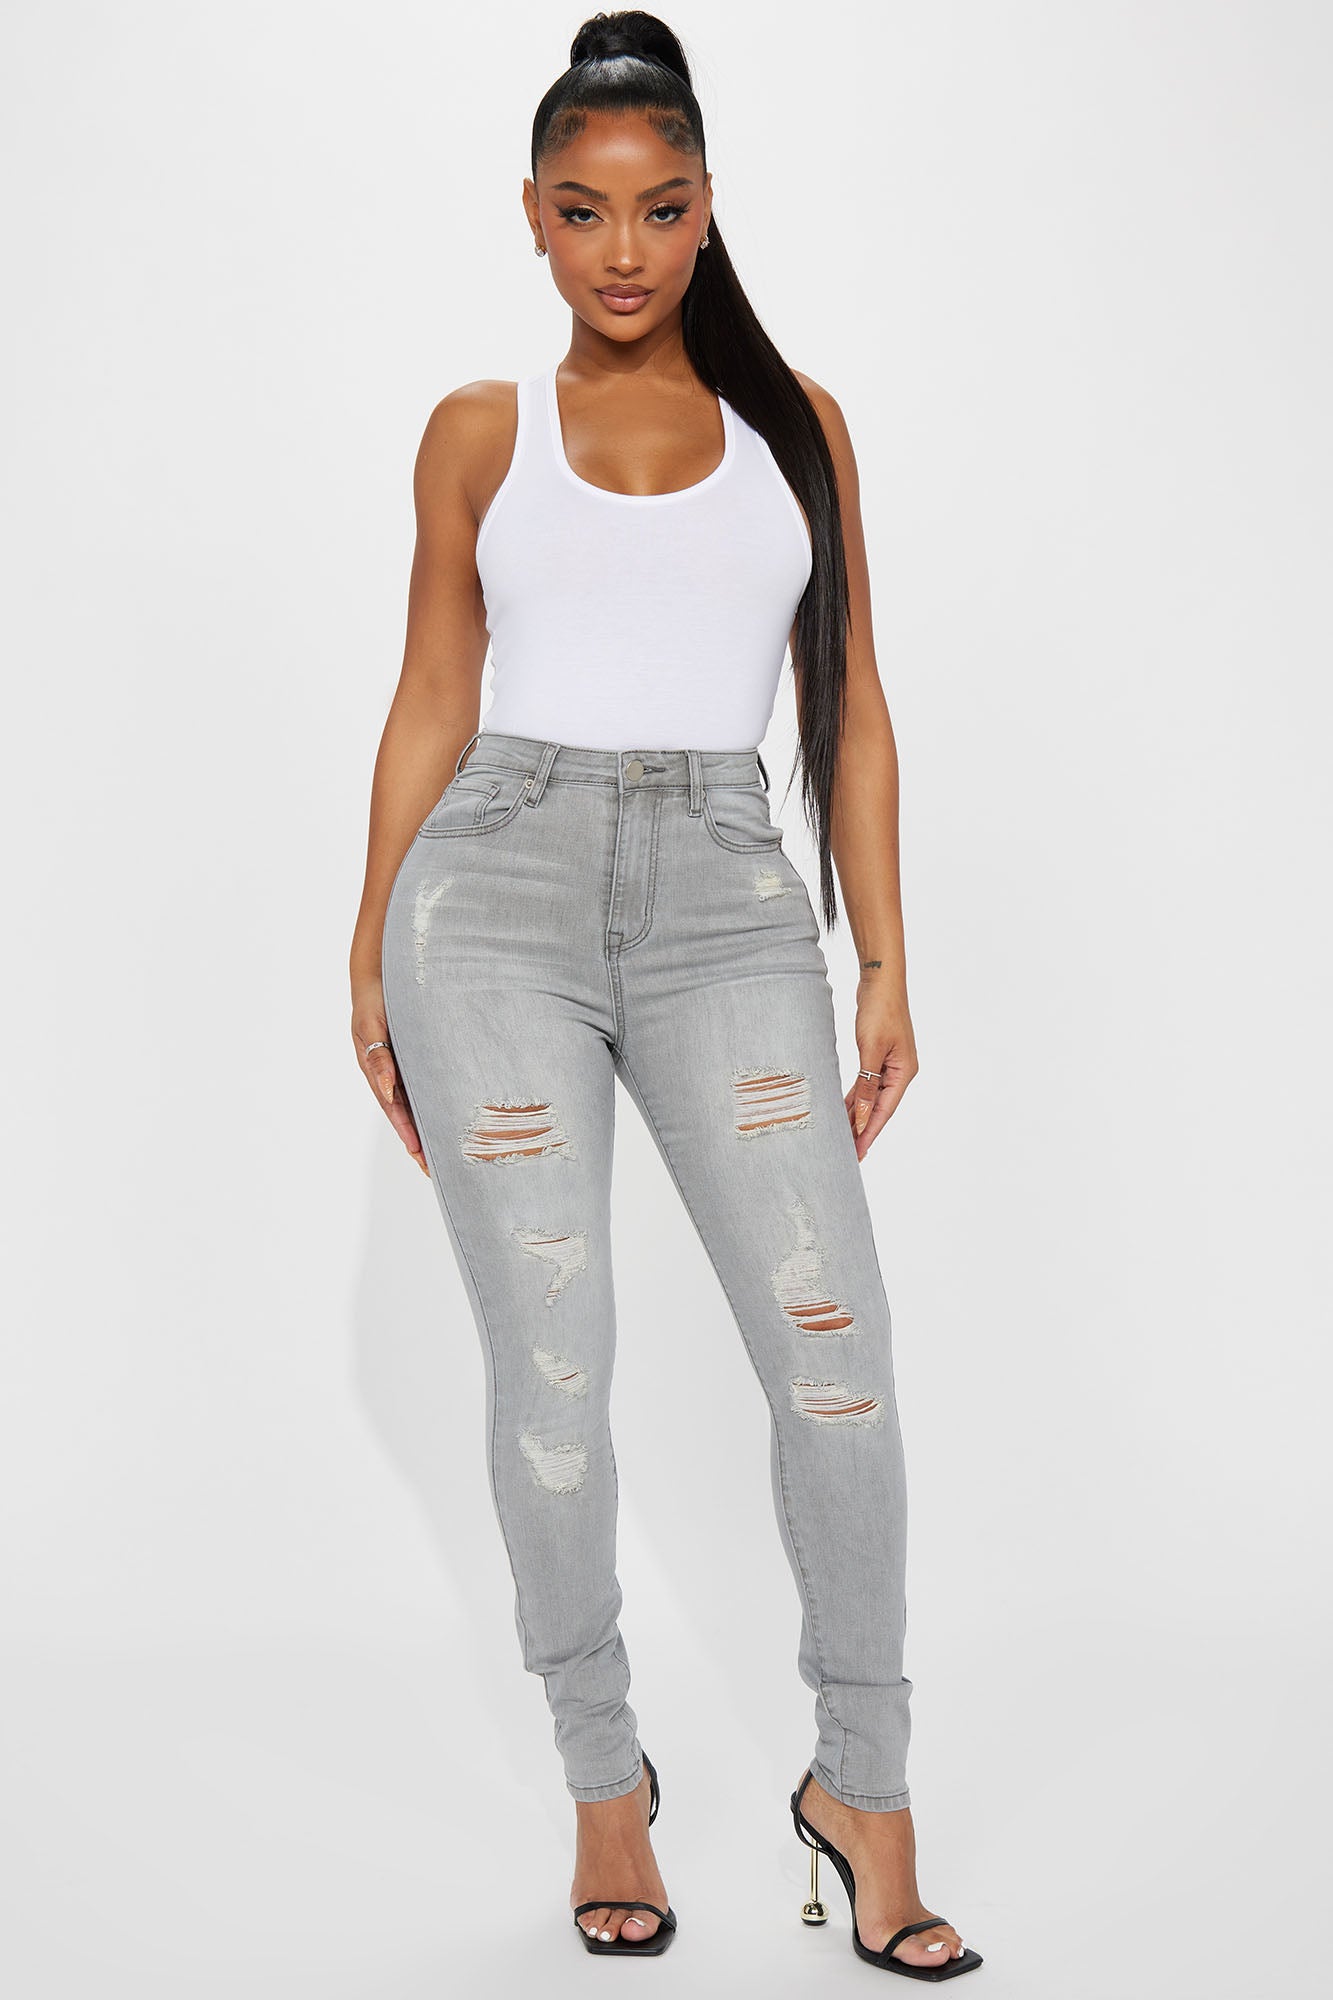 Women's Jeans, Skinny, Ripped & High Waisted Jeans